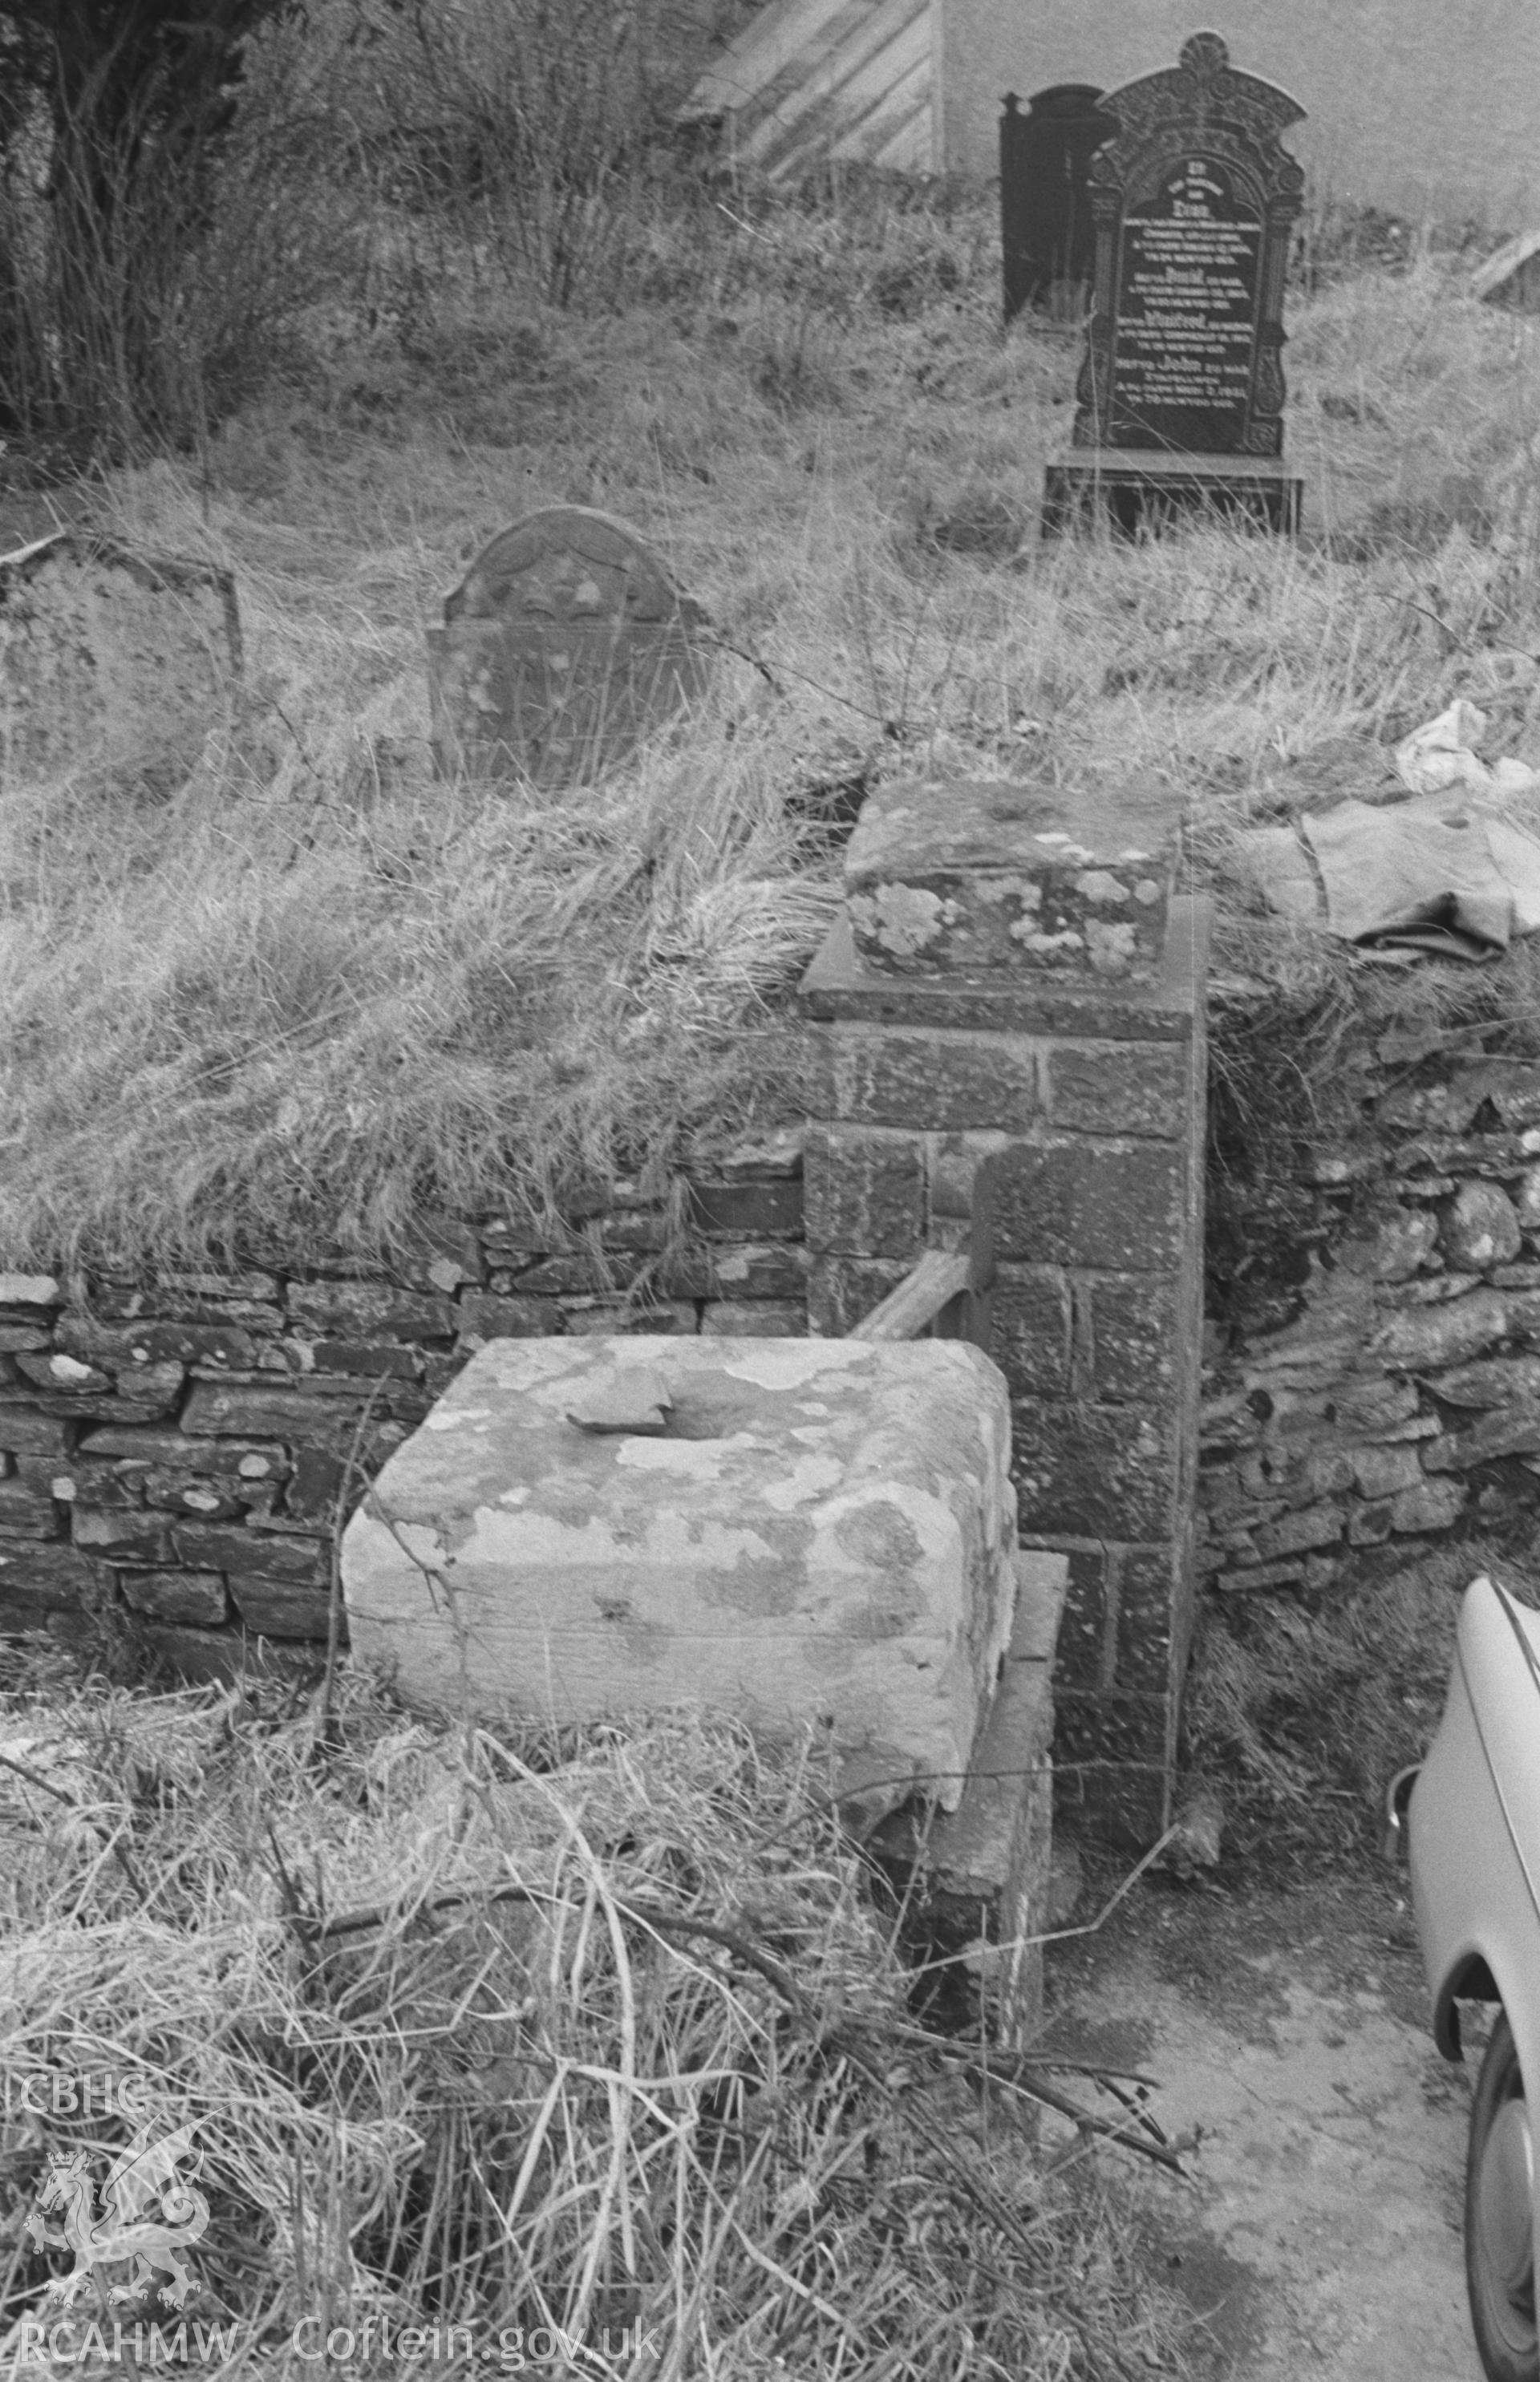 Black and White photograph showing Bowe (upside down on near gatepost) and base (on further gatepost) of Norman font, at north east corner of Lledrod churchyard. Photographed by Arthur Chater in April 1963 from Grid Reference SN646702, looking north-west.